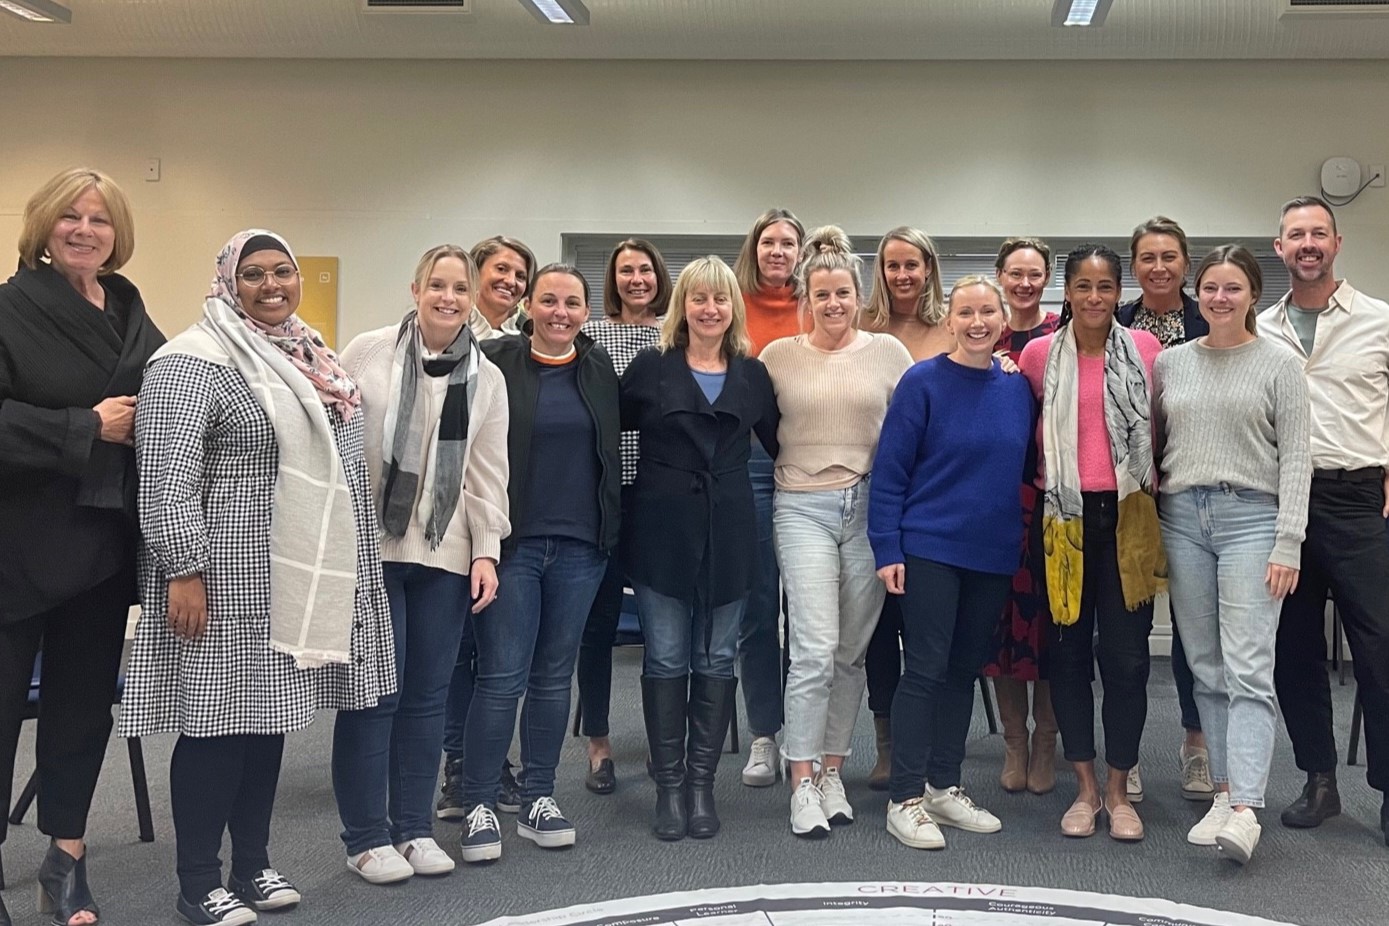 A photo of the 2022 cohort from the AIS Talent Program, Women in Executive